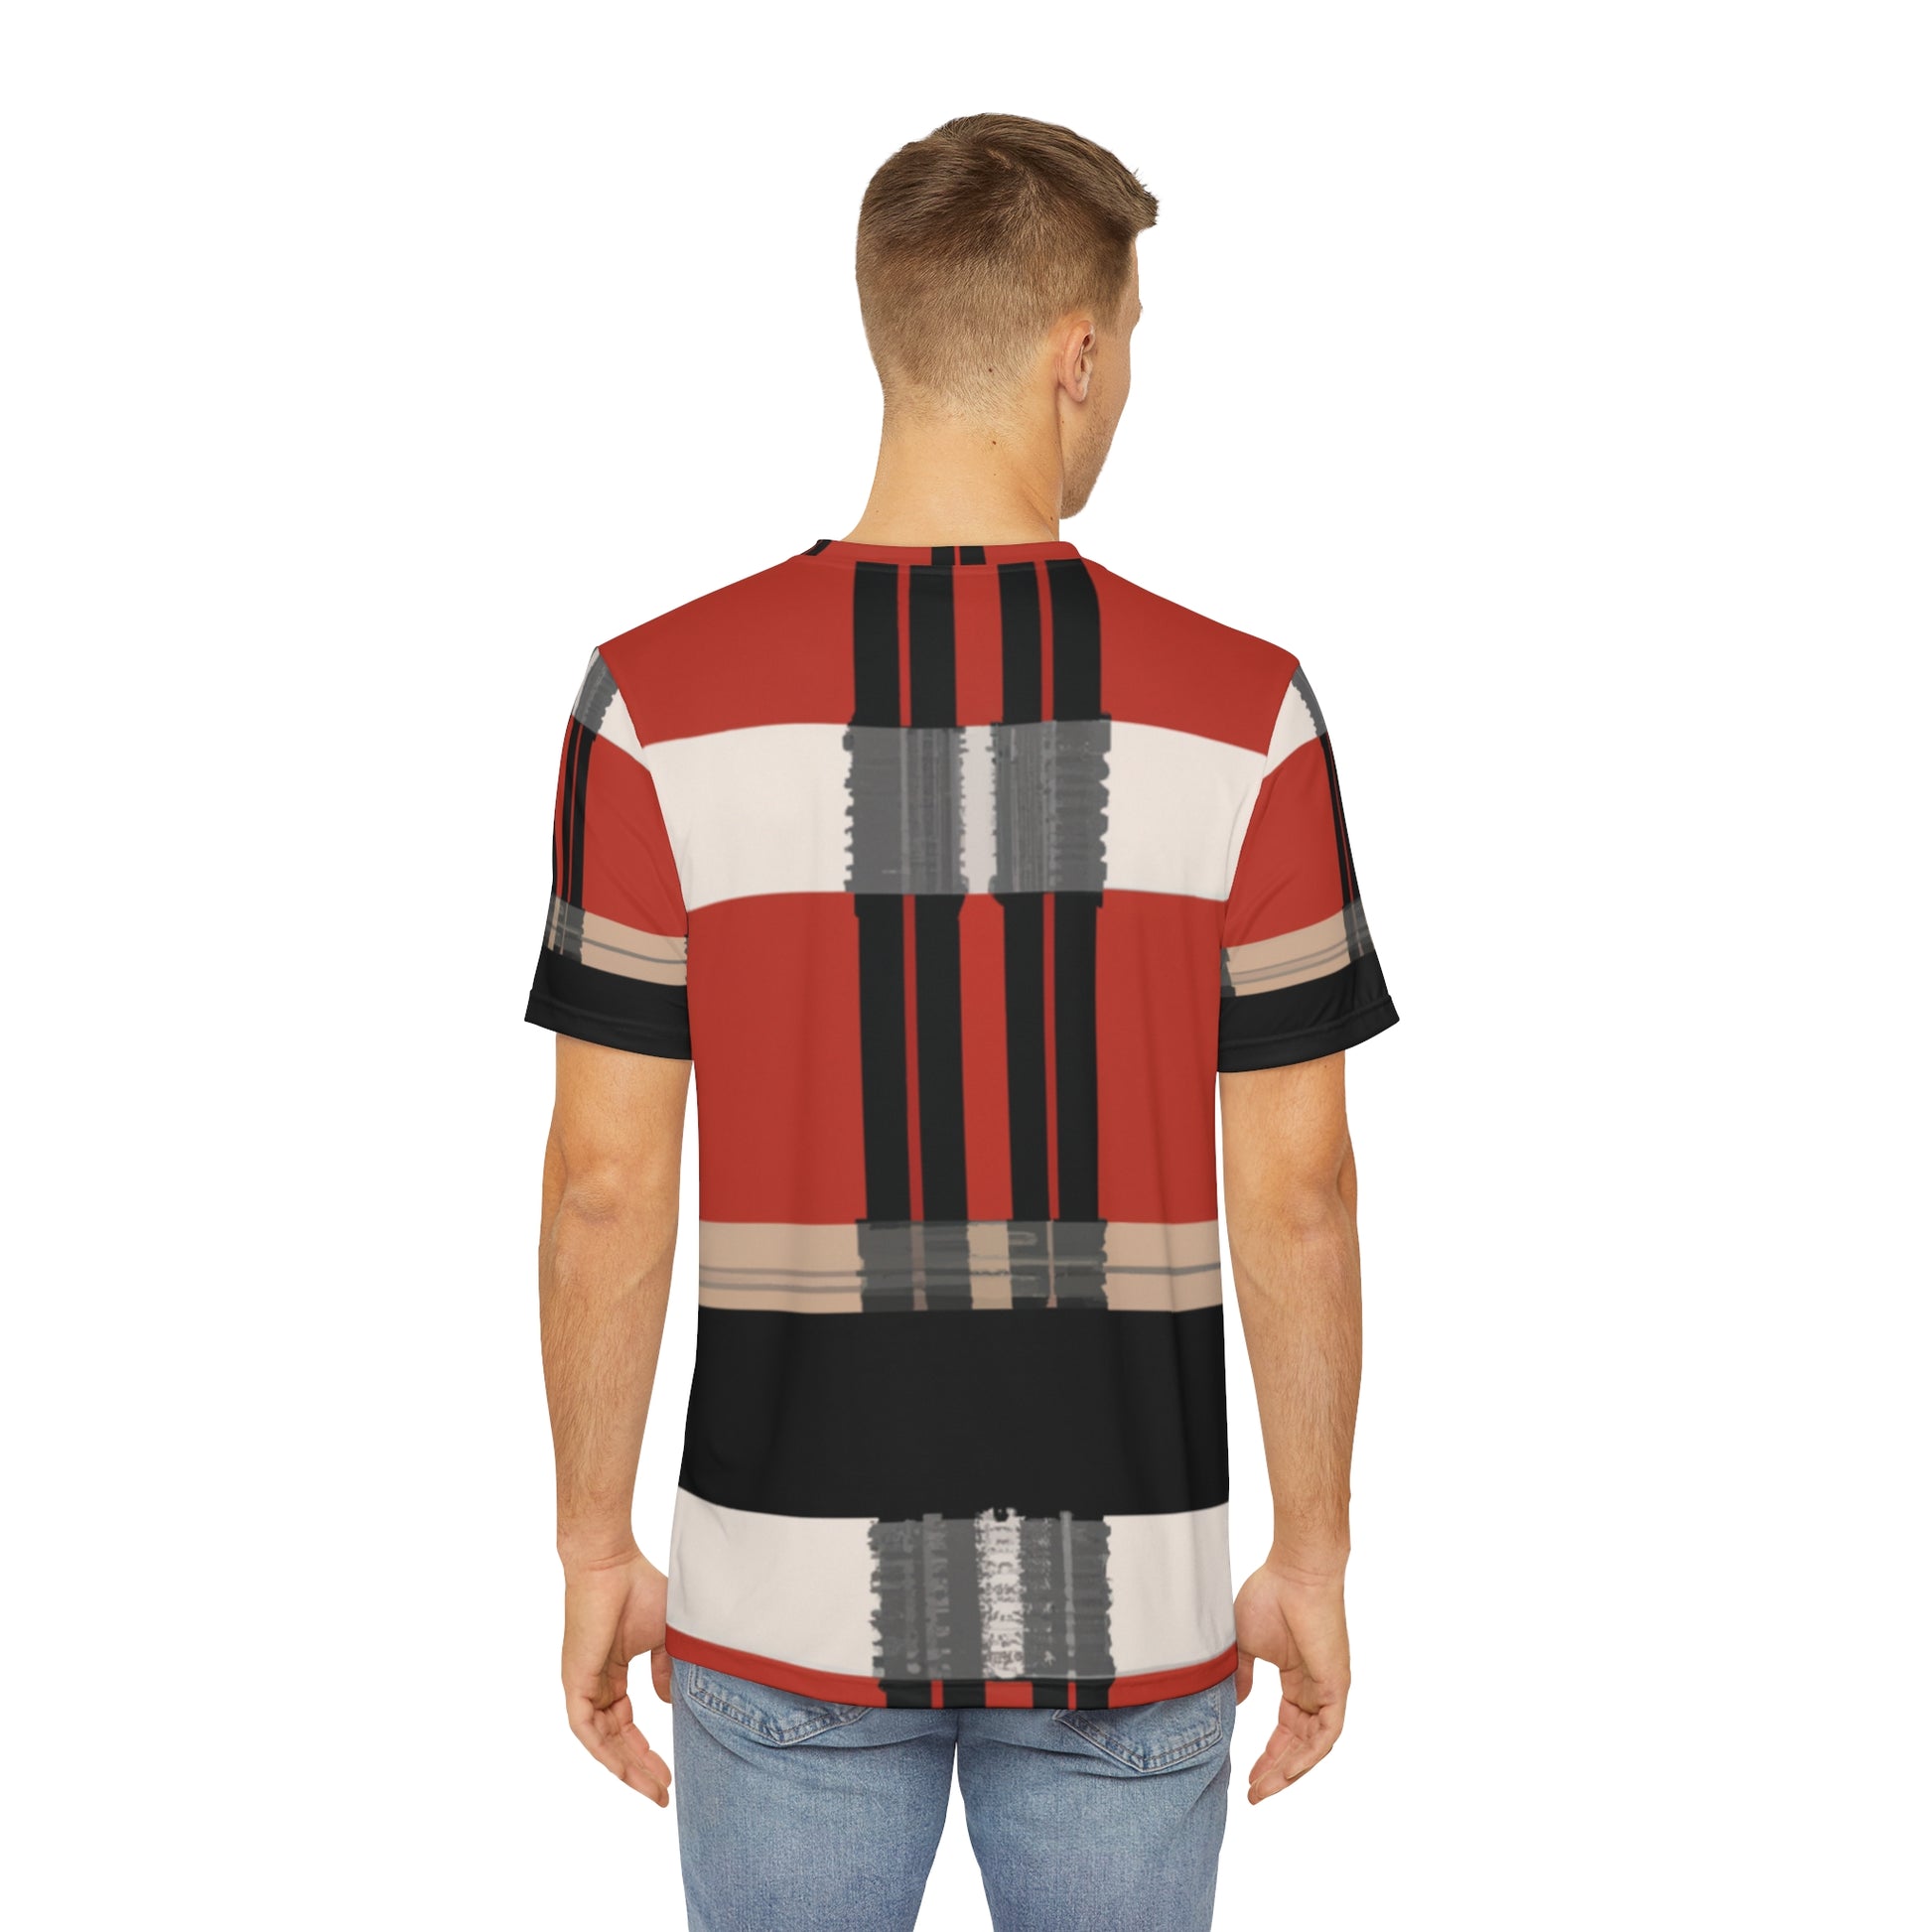 Back view of the Highland Cardinal Alba Tartan Crewneck Pullover All-Over Print Short-Sleeved Shirt red black beige plaid pattern paired with casual denim pants worn by a white man